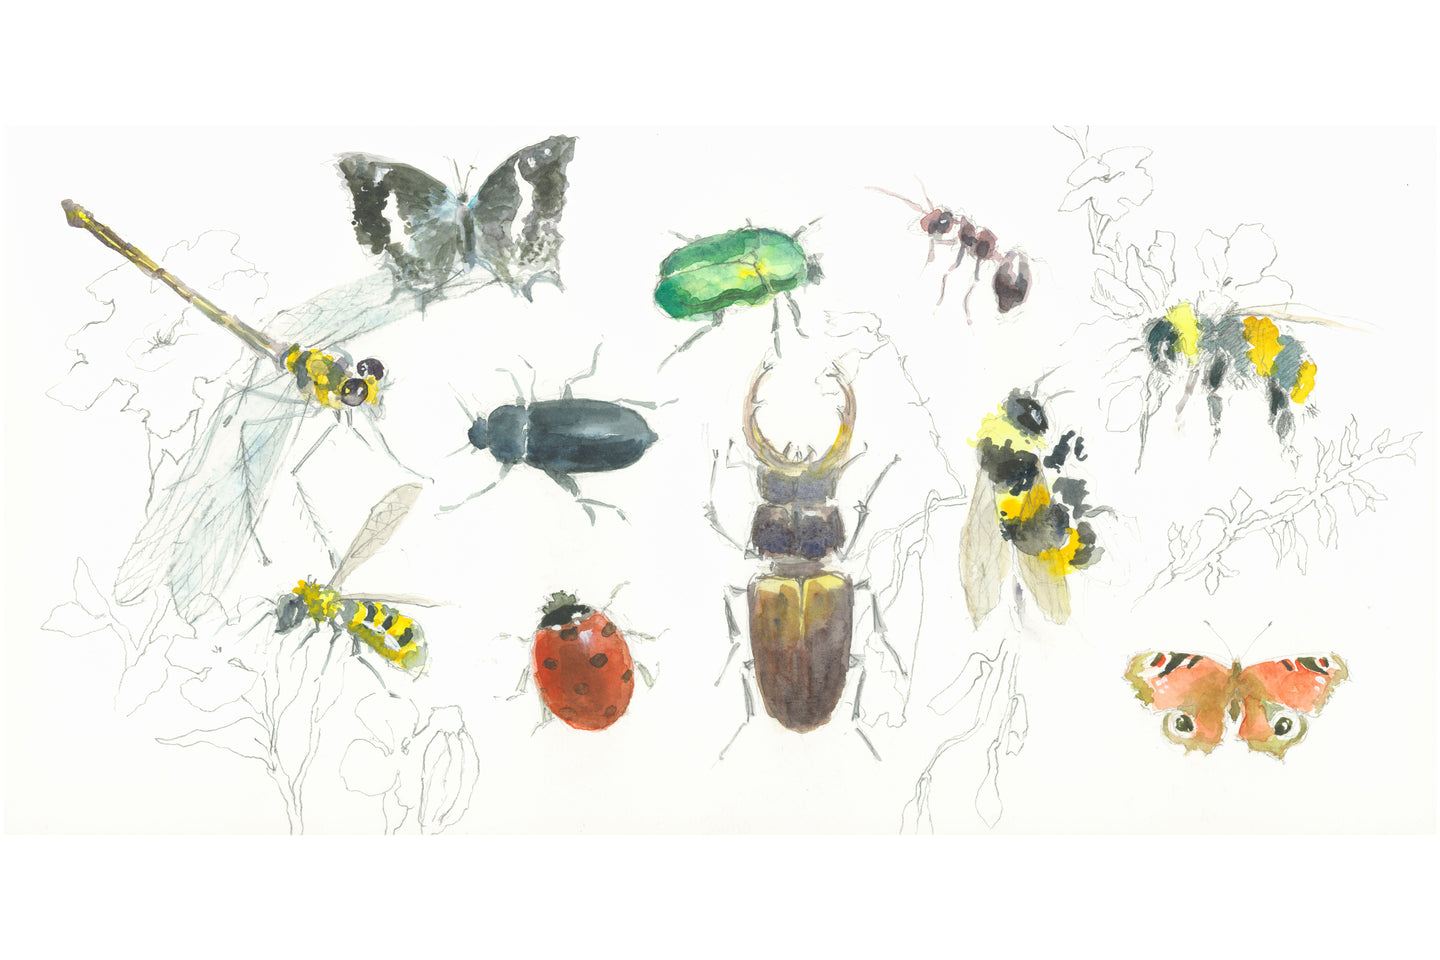 Les Insectes - Isabelle issaverdens